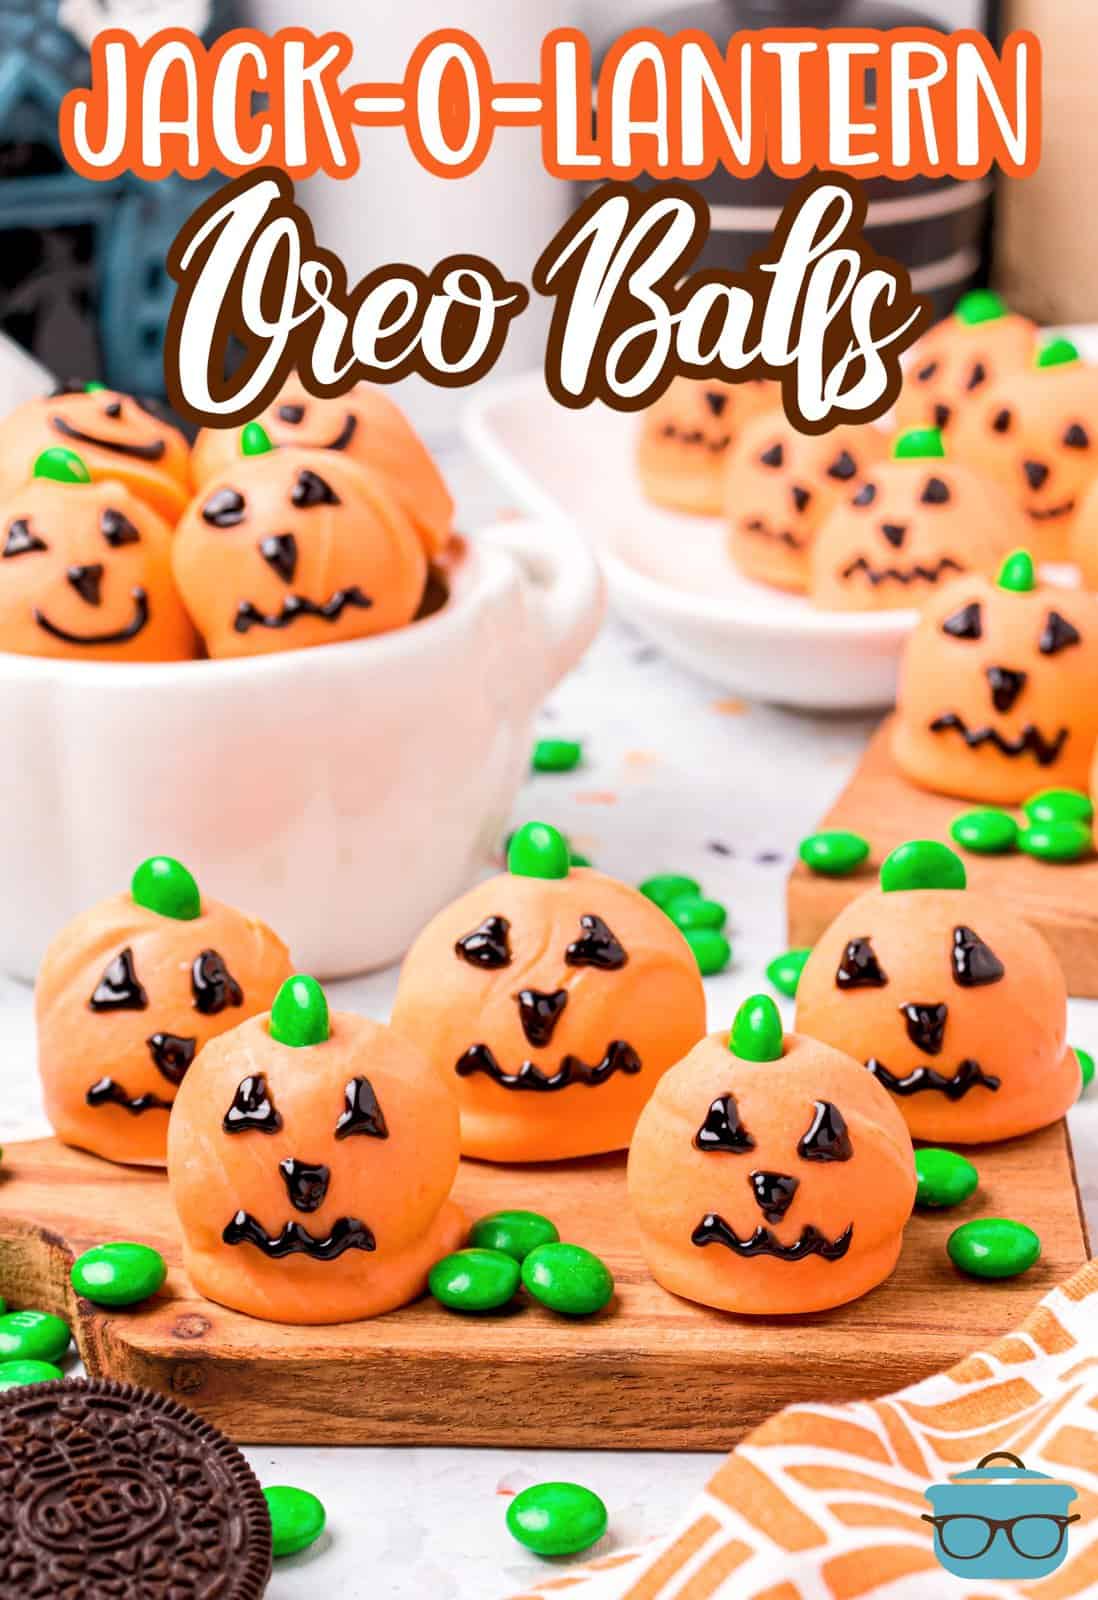 Pinterest image of Jack-O-Lantern Oreo Balls spread over wooden board with more in bowl, Pinterest image.